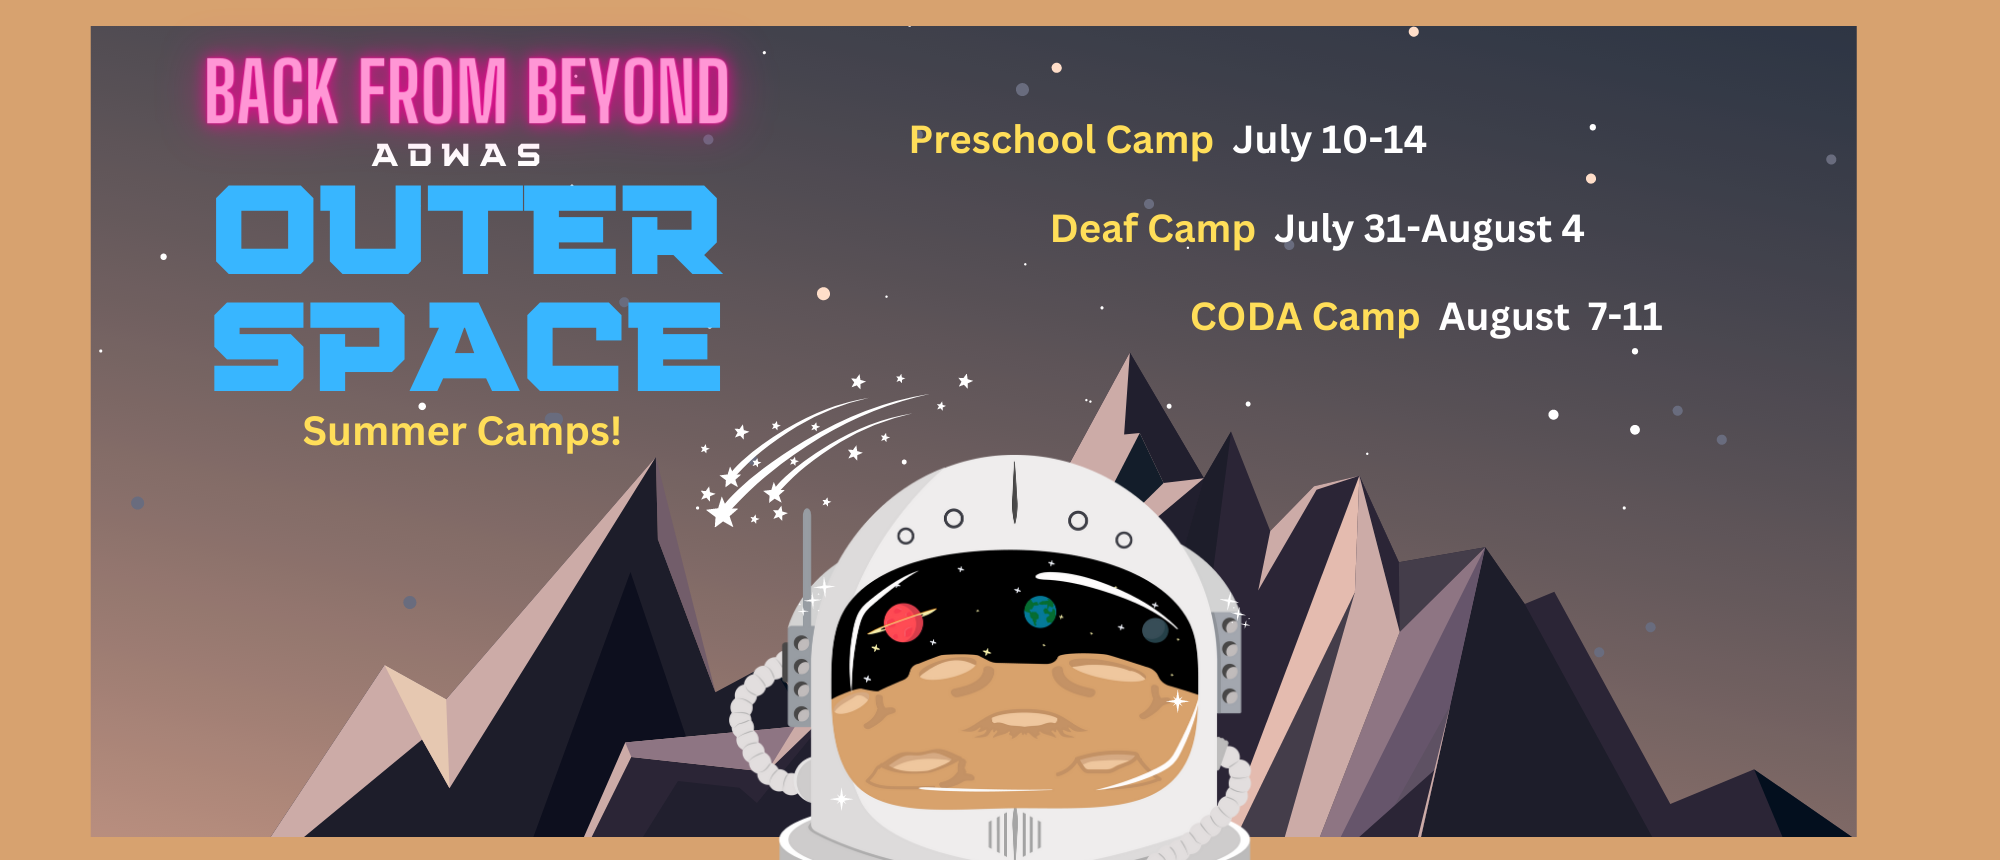 ADWAS Preschool, Deaf, and CODA summer camps are now open for registration! Click for more information.